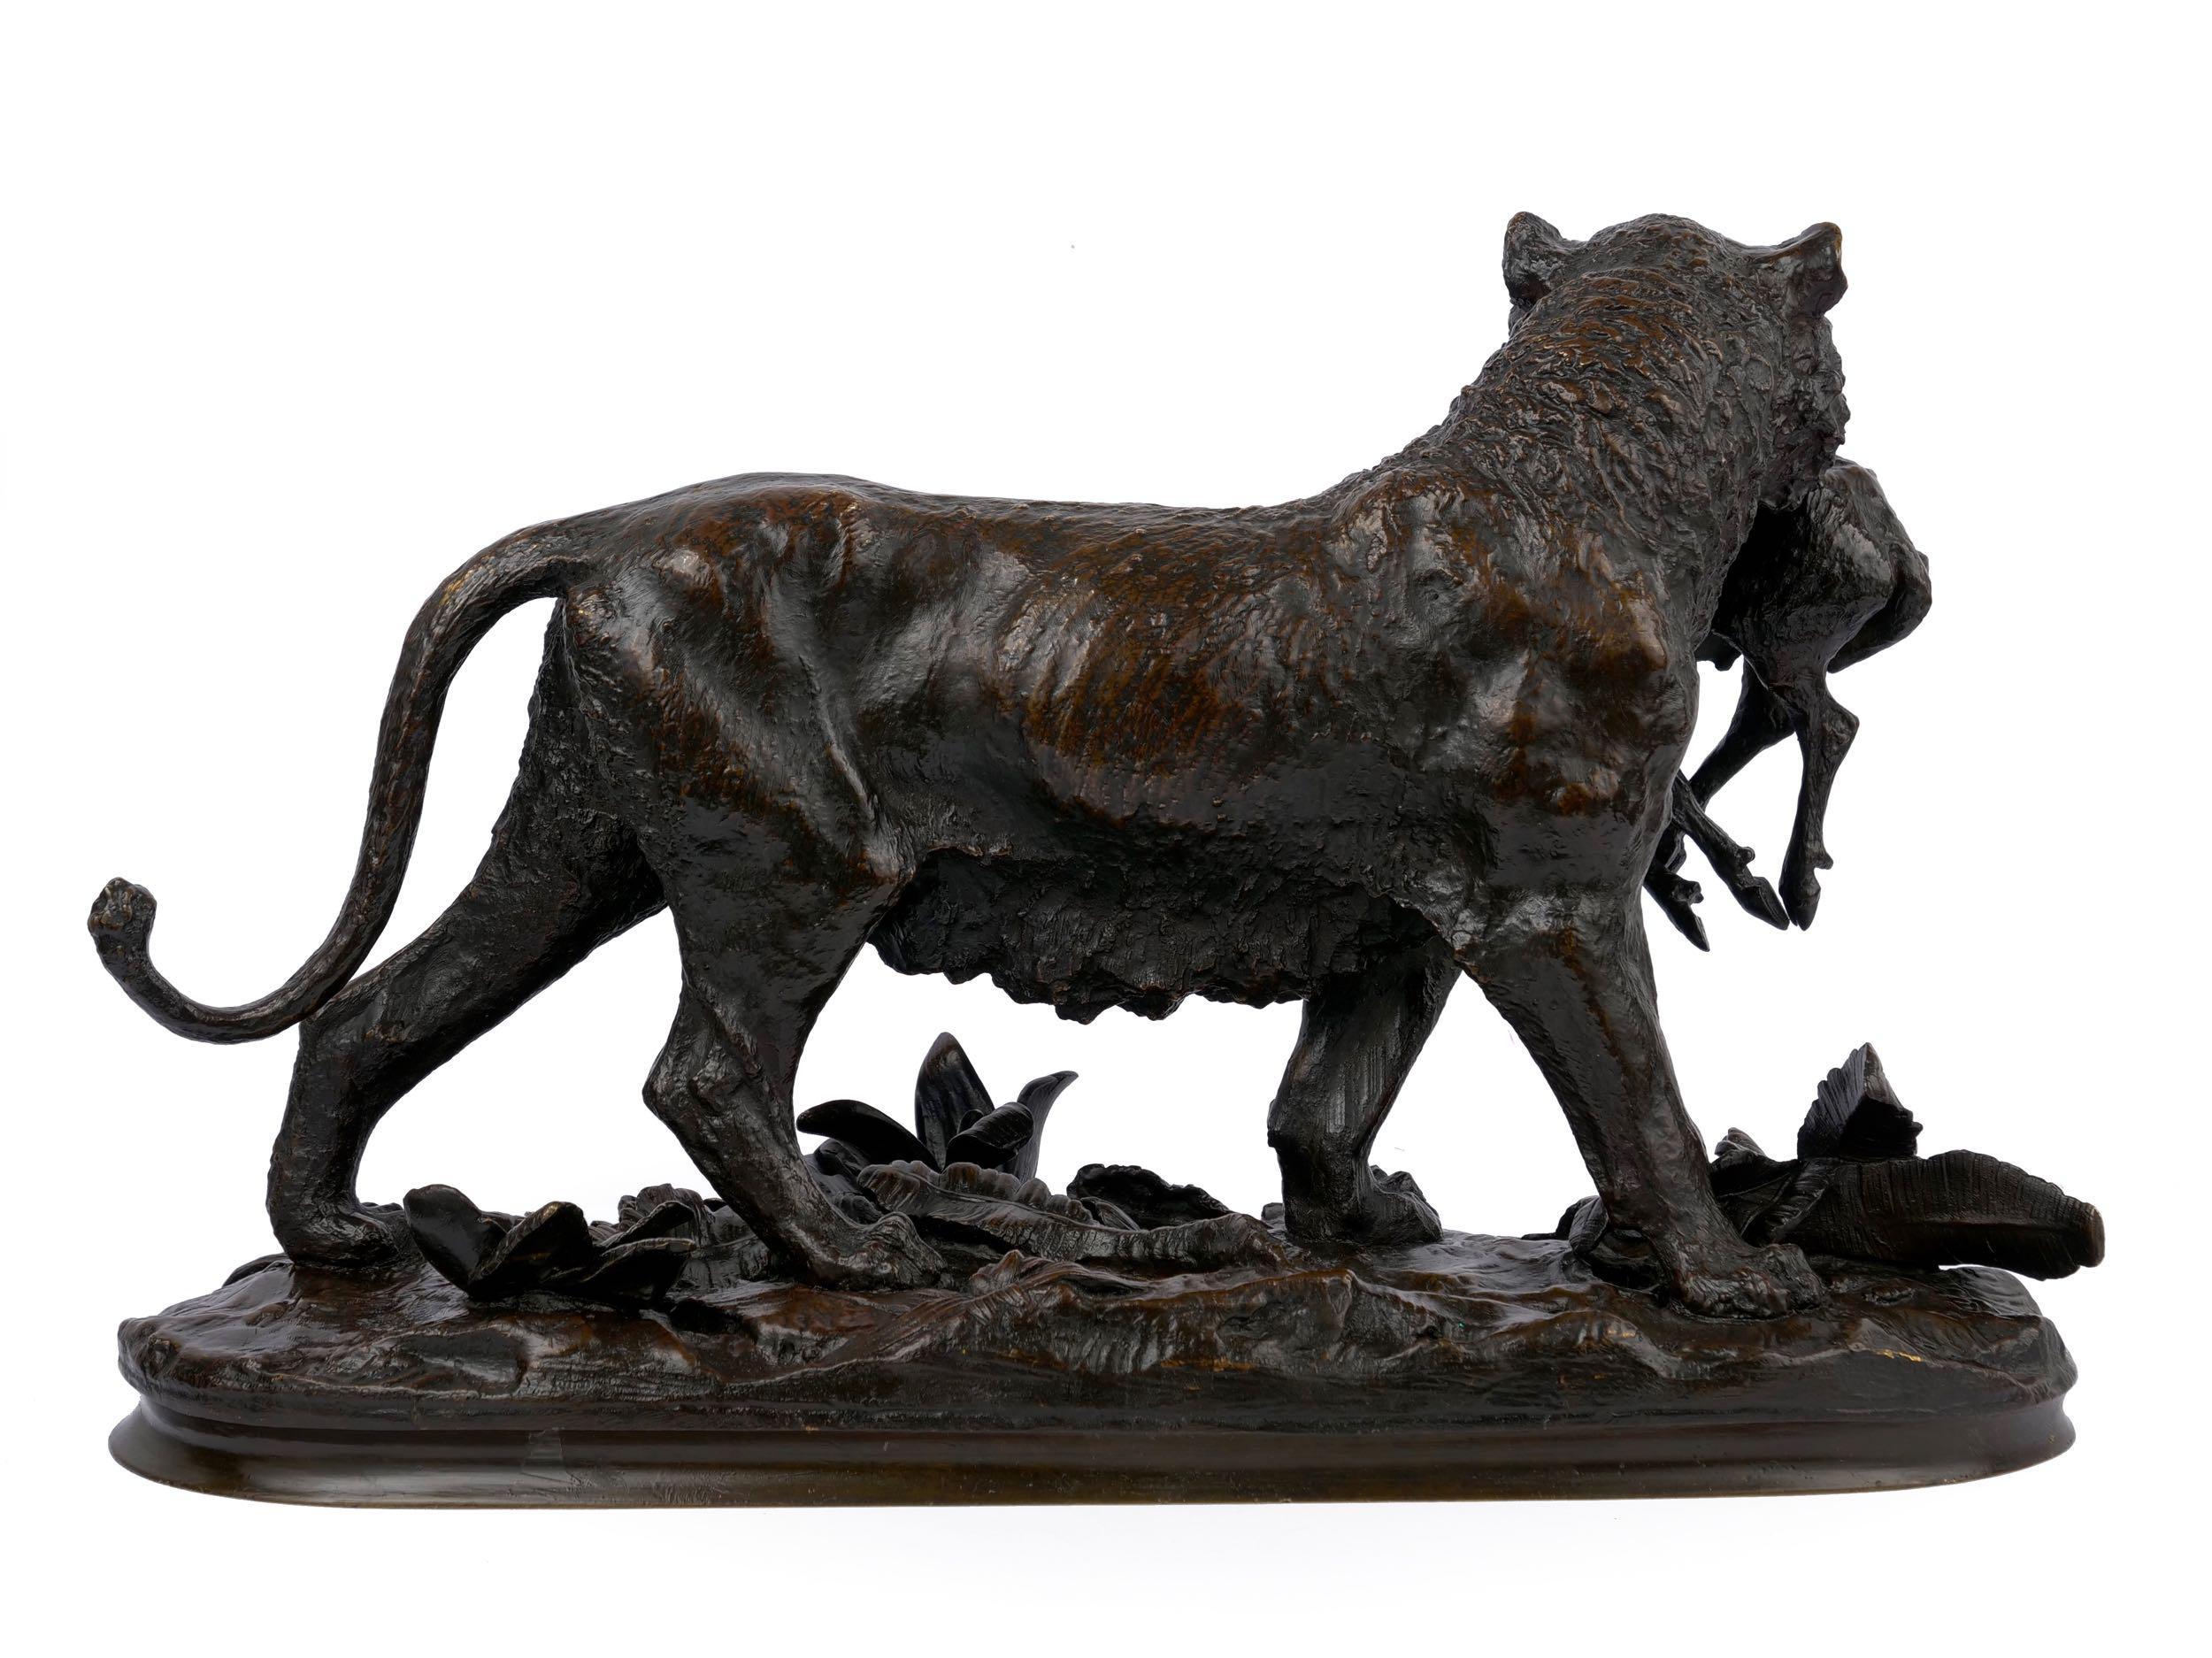 19th Century “Lioness Carrying an Antelope” French Bronze Sculpture by Christophe Fratin